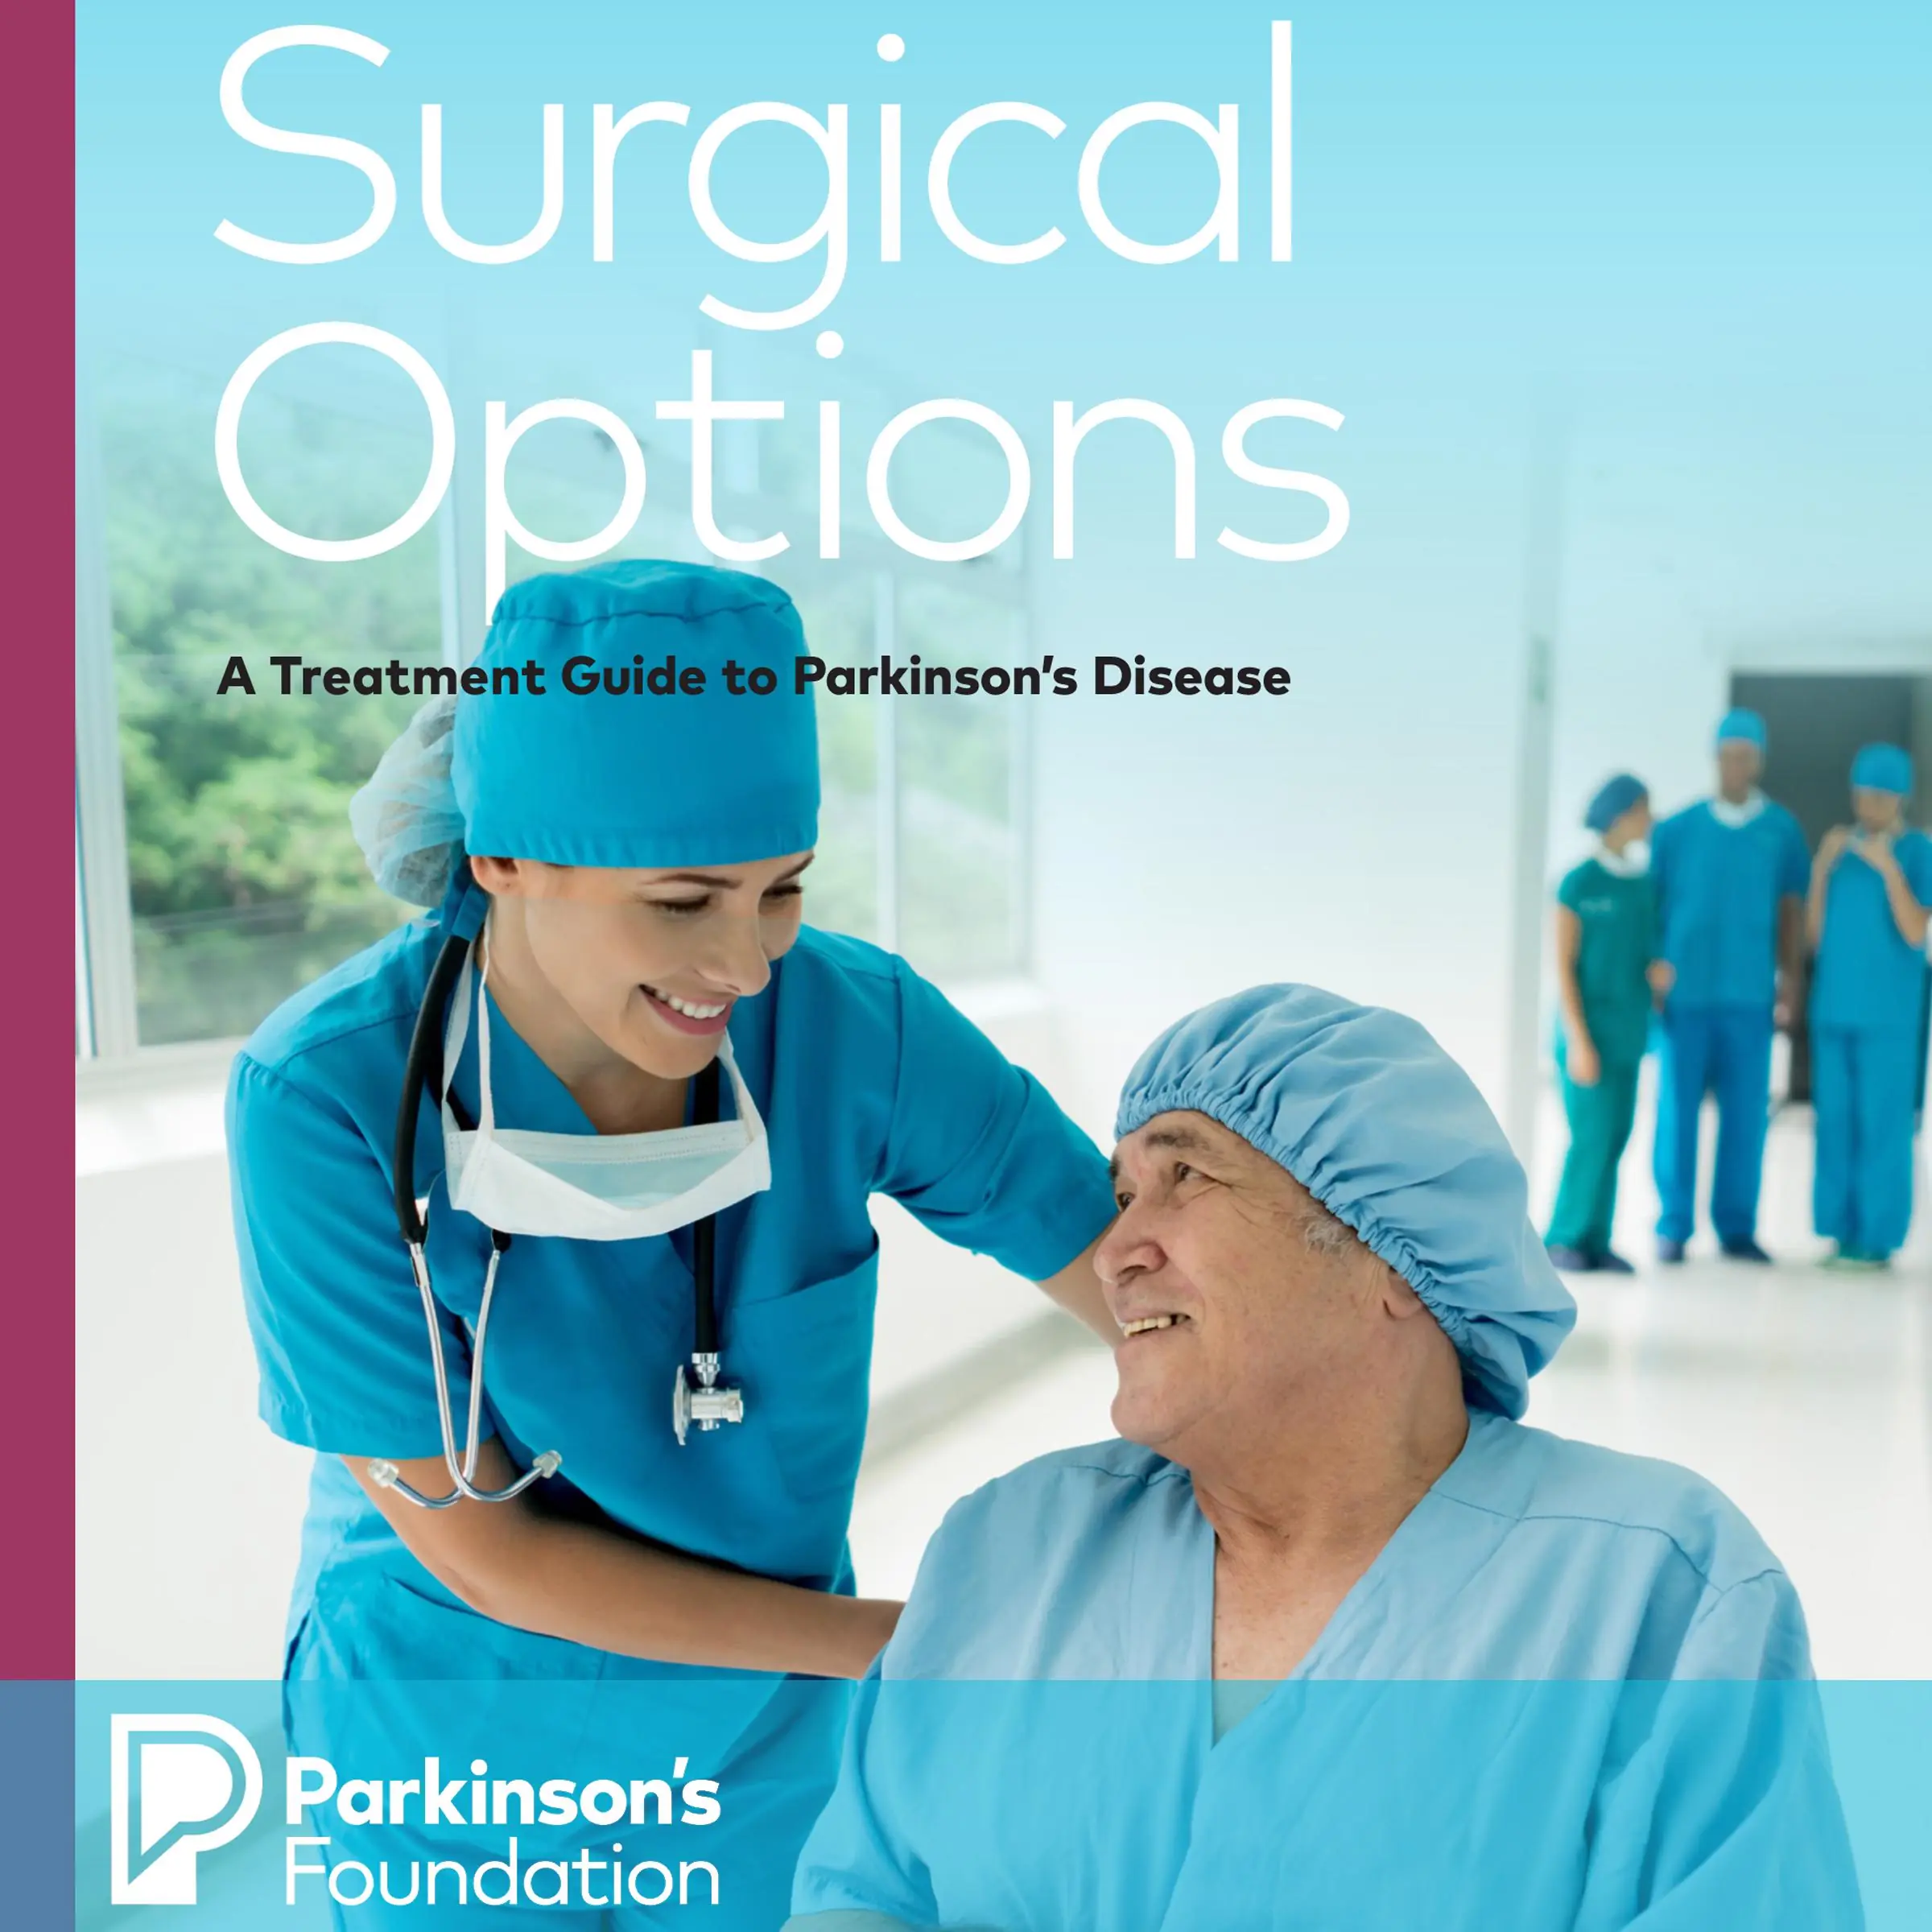 Surgical Options : A Treatment Guide to Parkinson's Disease Audiobook by Parkinson's Foundation